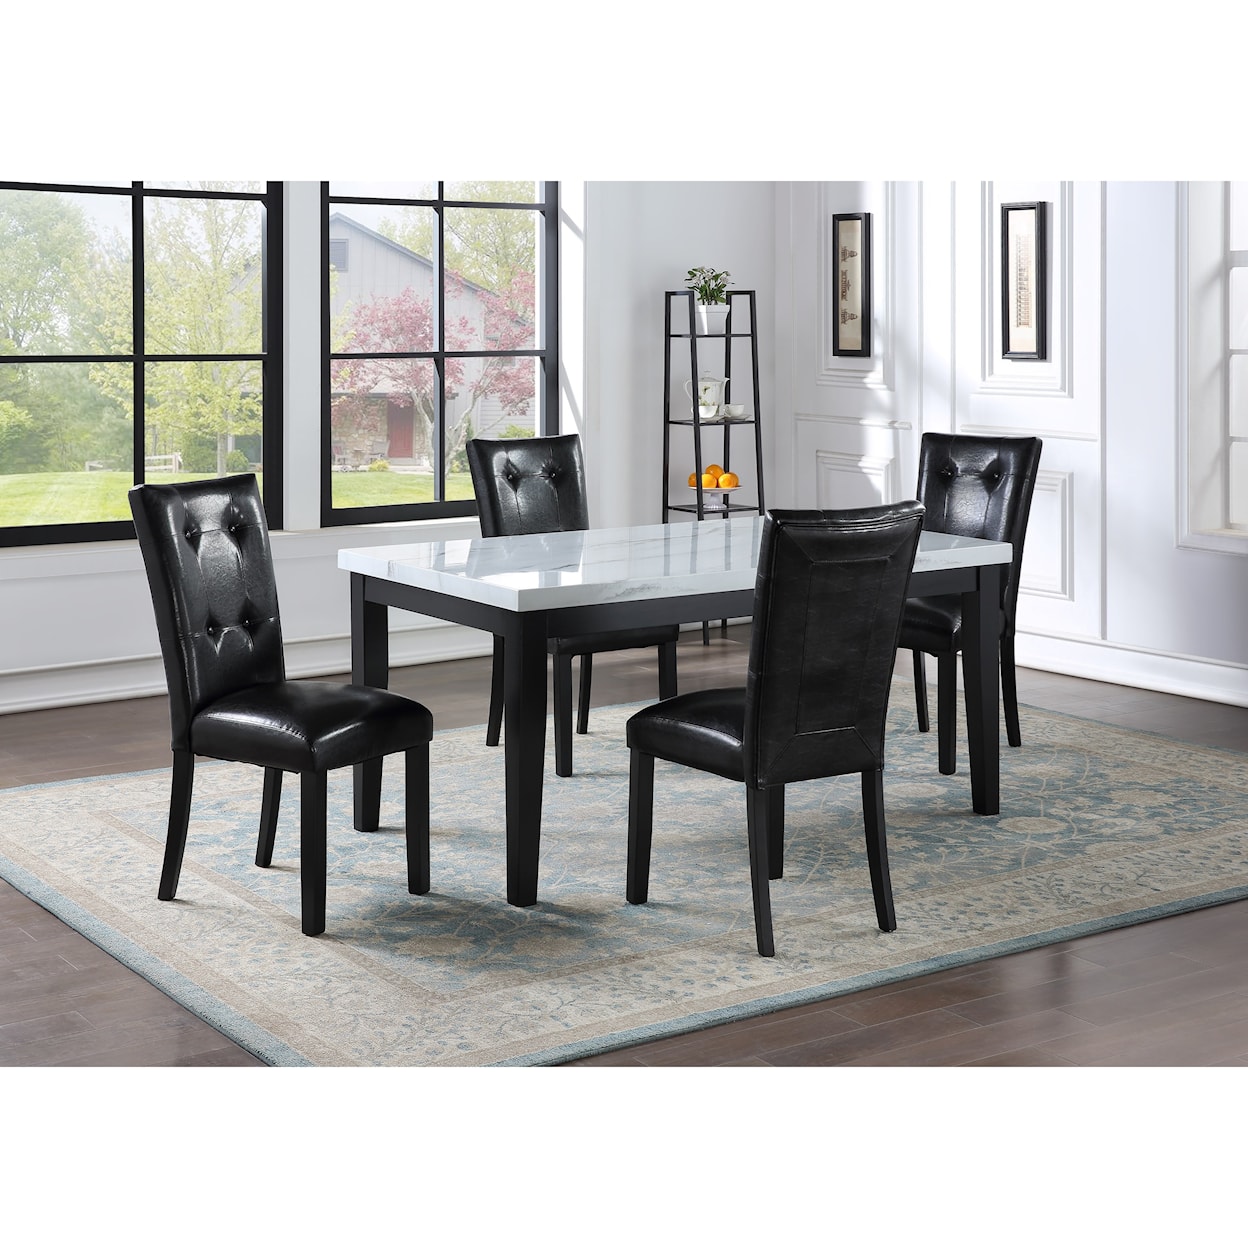 Steve Silver Sterling 5-Piece Table and Chair Set